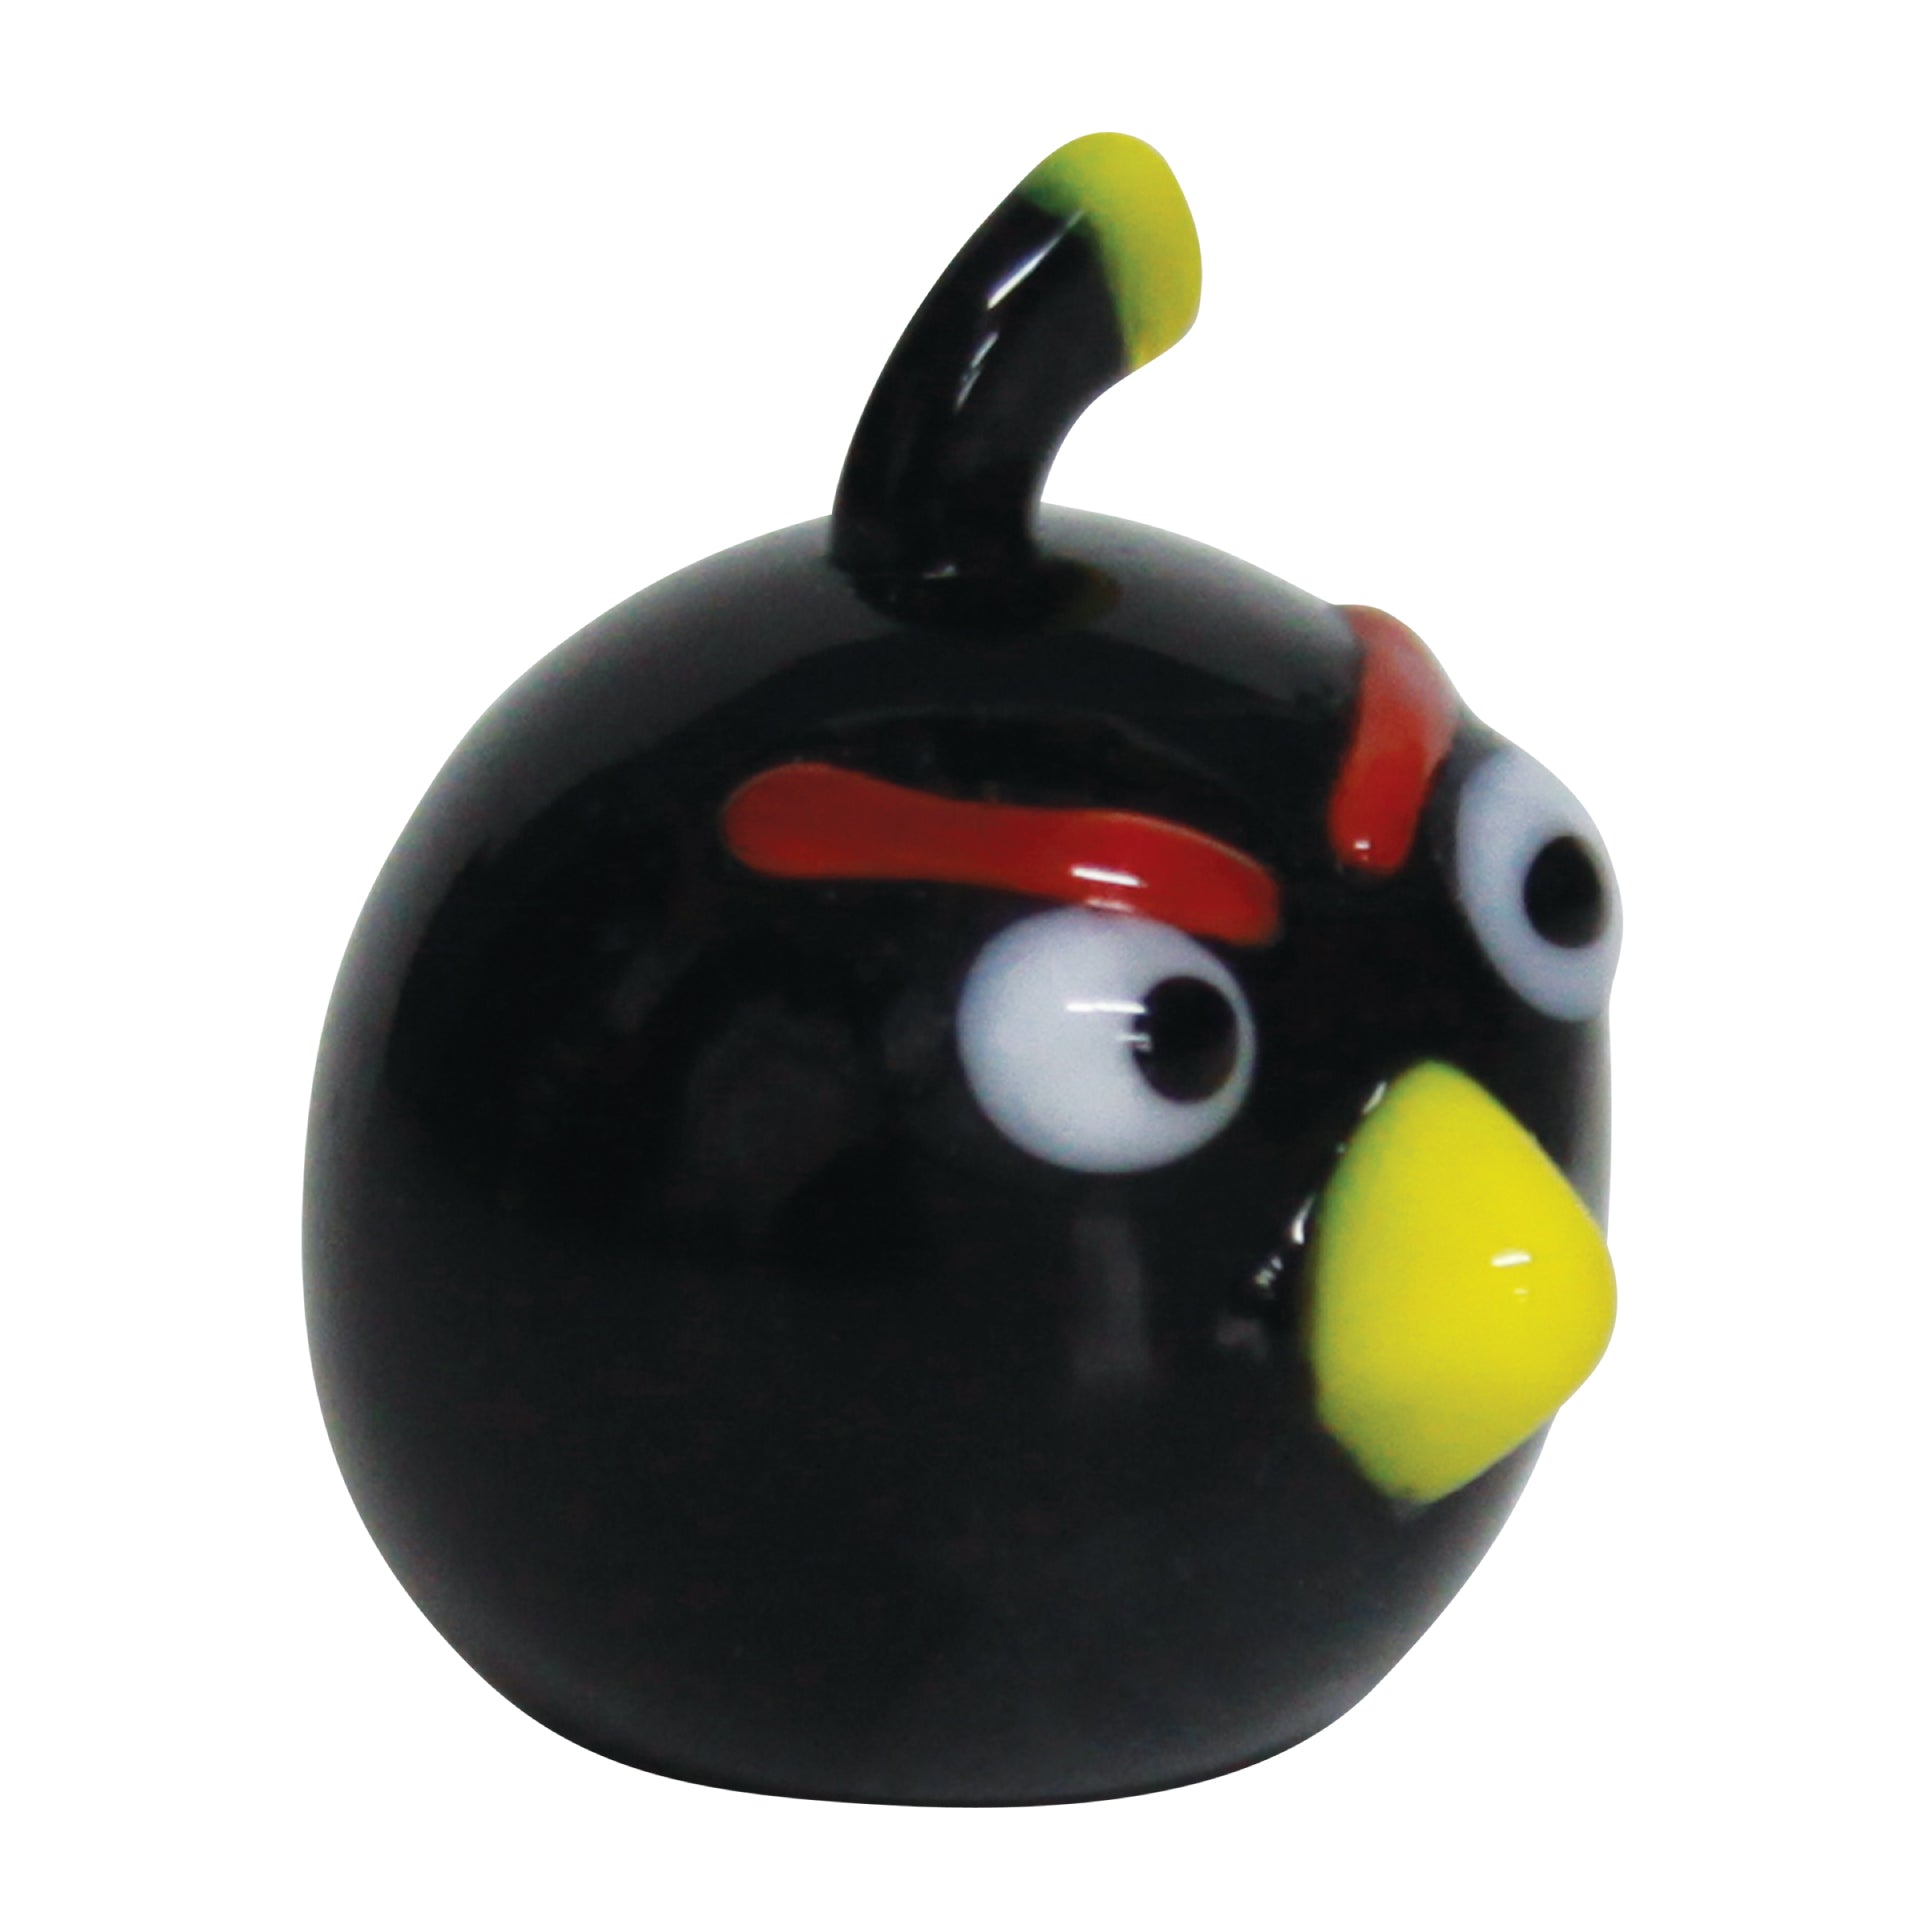 GlassWorld Angry Birds Black Bird collectible miniature glass figurine Product Image